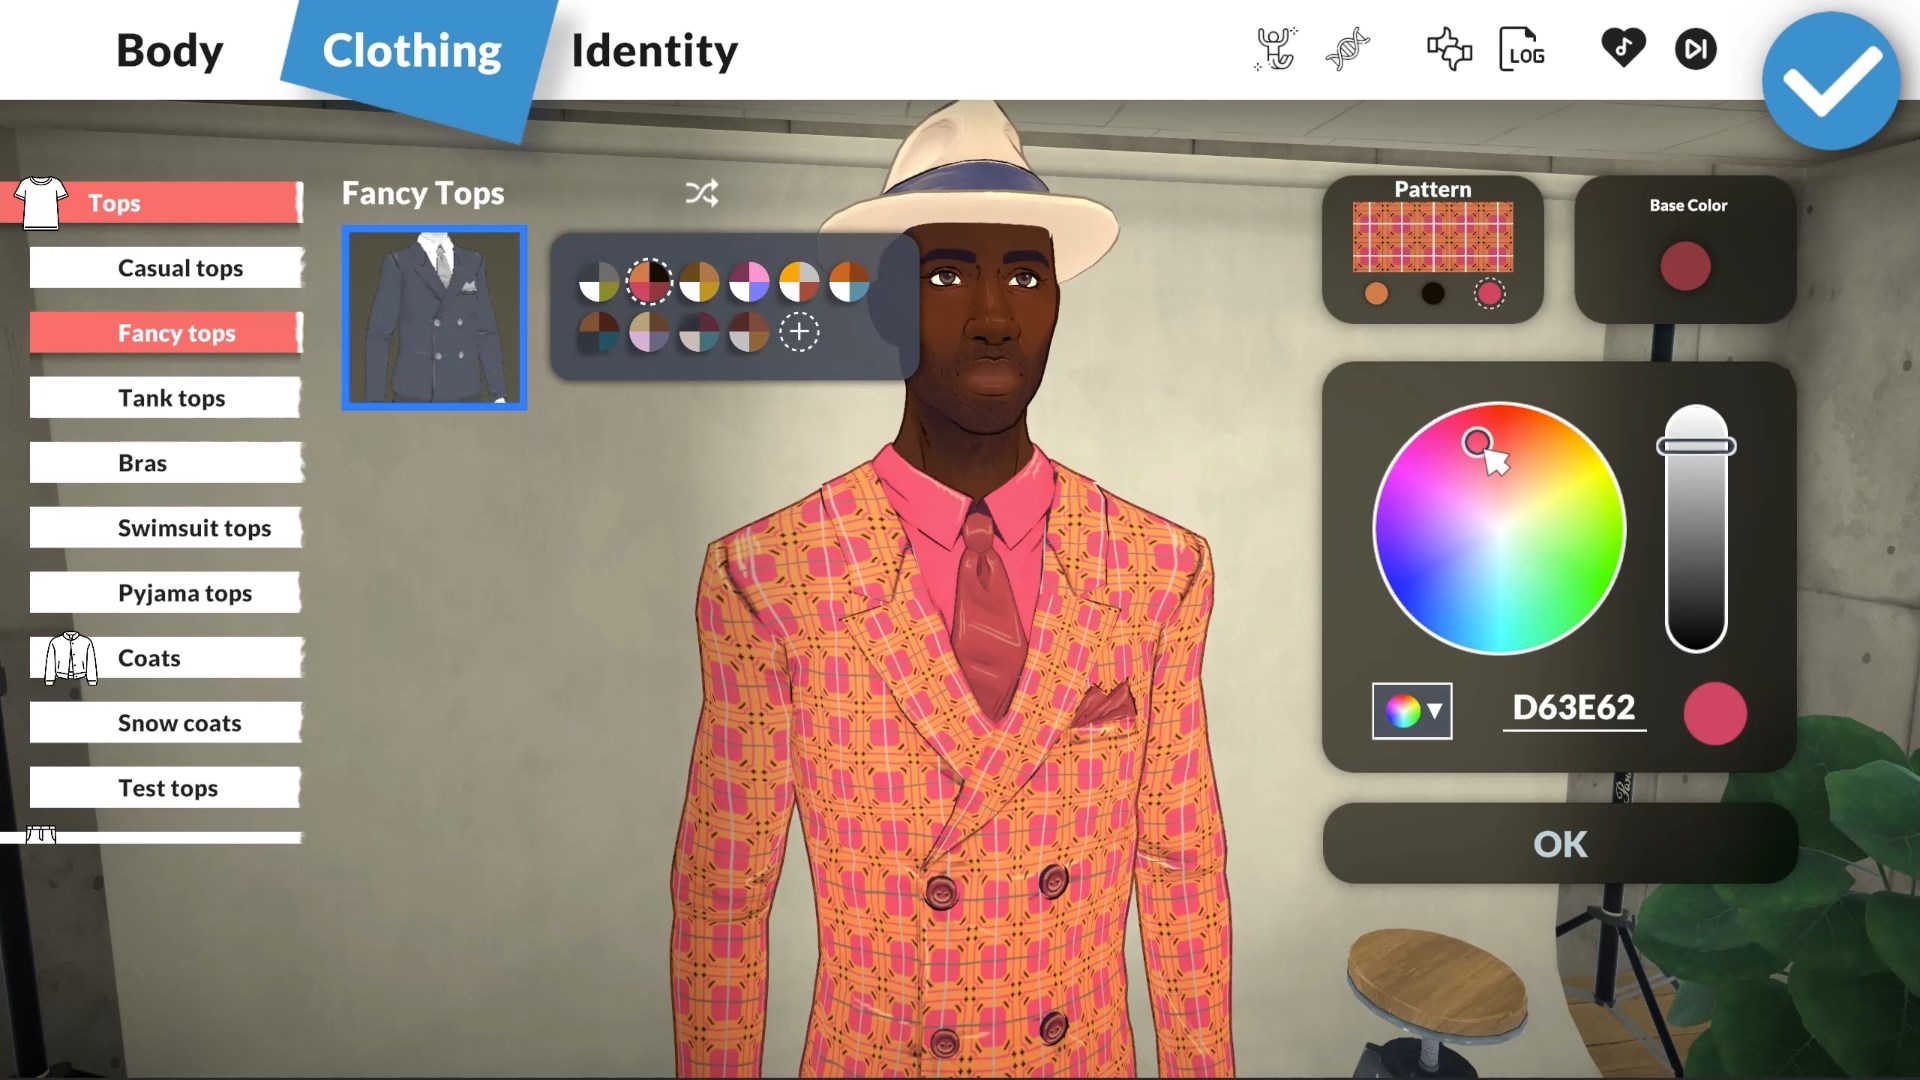 Sims-like Paralives details its character creator and gender-free clothing options